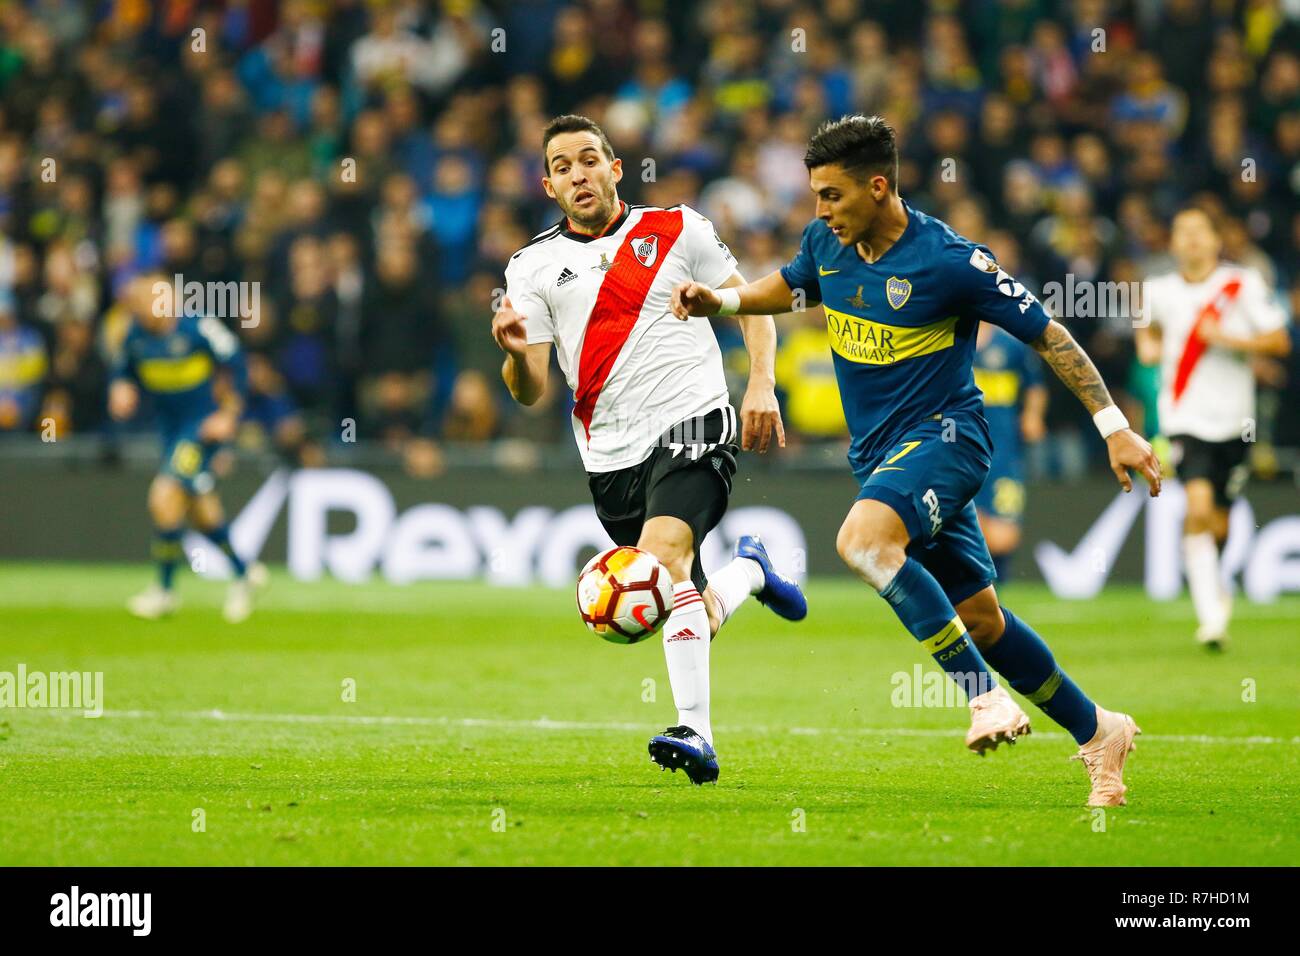 Madrid, Spain. 9th Dec, 2018. Cristian David Pavon (Boca Juniors) in action during the second leg match between River Plate and Boca Juniors as part of the Finals of Copa CONMEBOL Libertadores 2018 at Estadio Santiago Bernabeu in Madrid.River Plate won the title of Copa Libertadores 2018 by beating Boca Juniors. Credit: Manu Reino/SOPA Images/ZUMA Wire/Alamy Live News Stock Photo